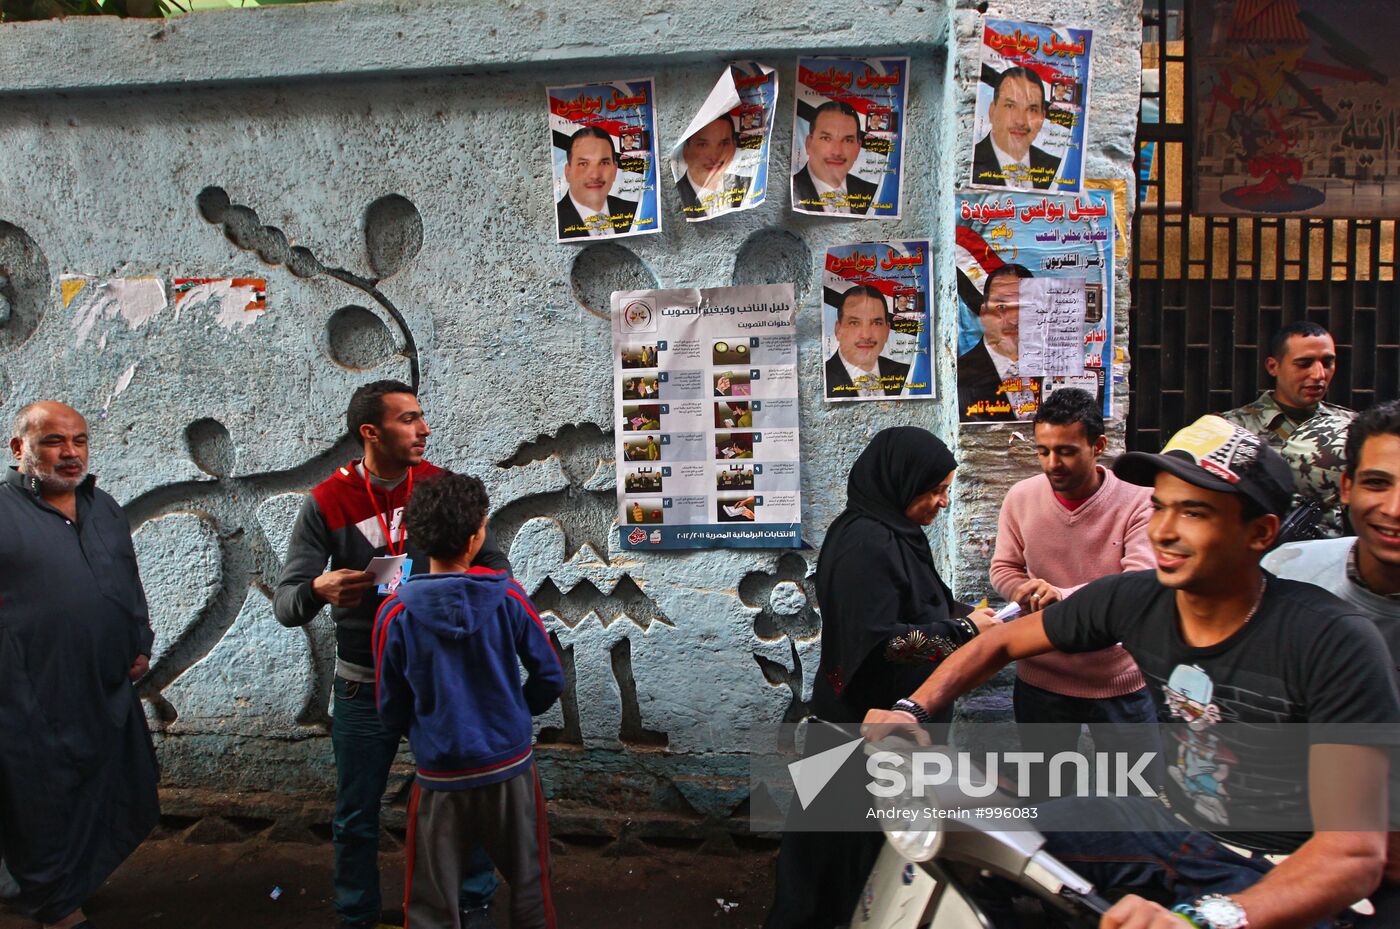 Parliamentary elections in Egypt